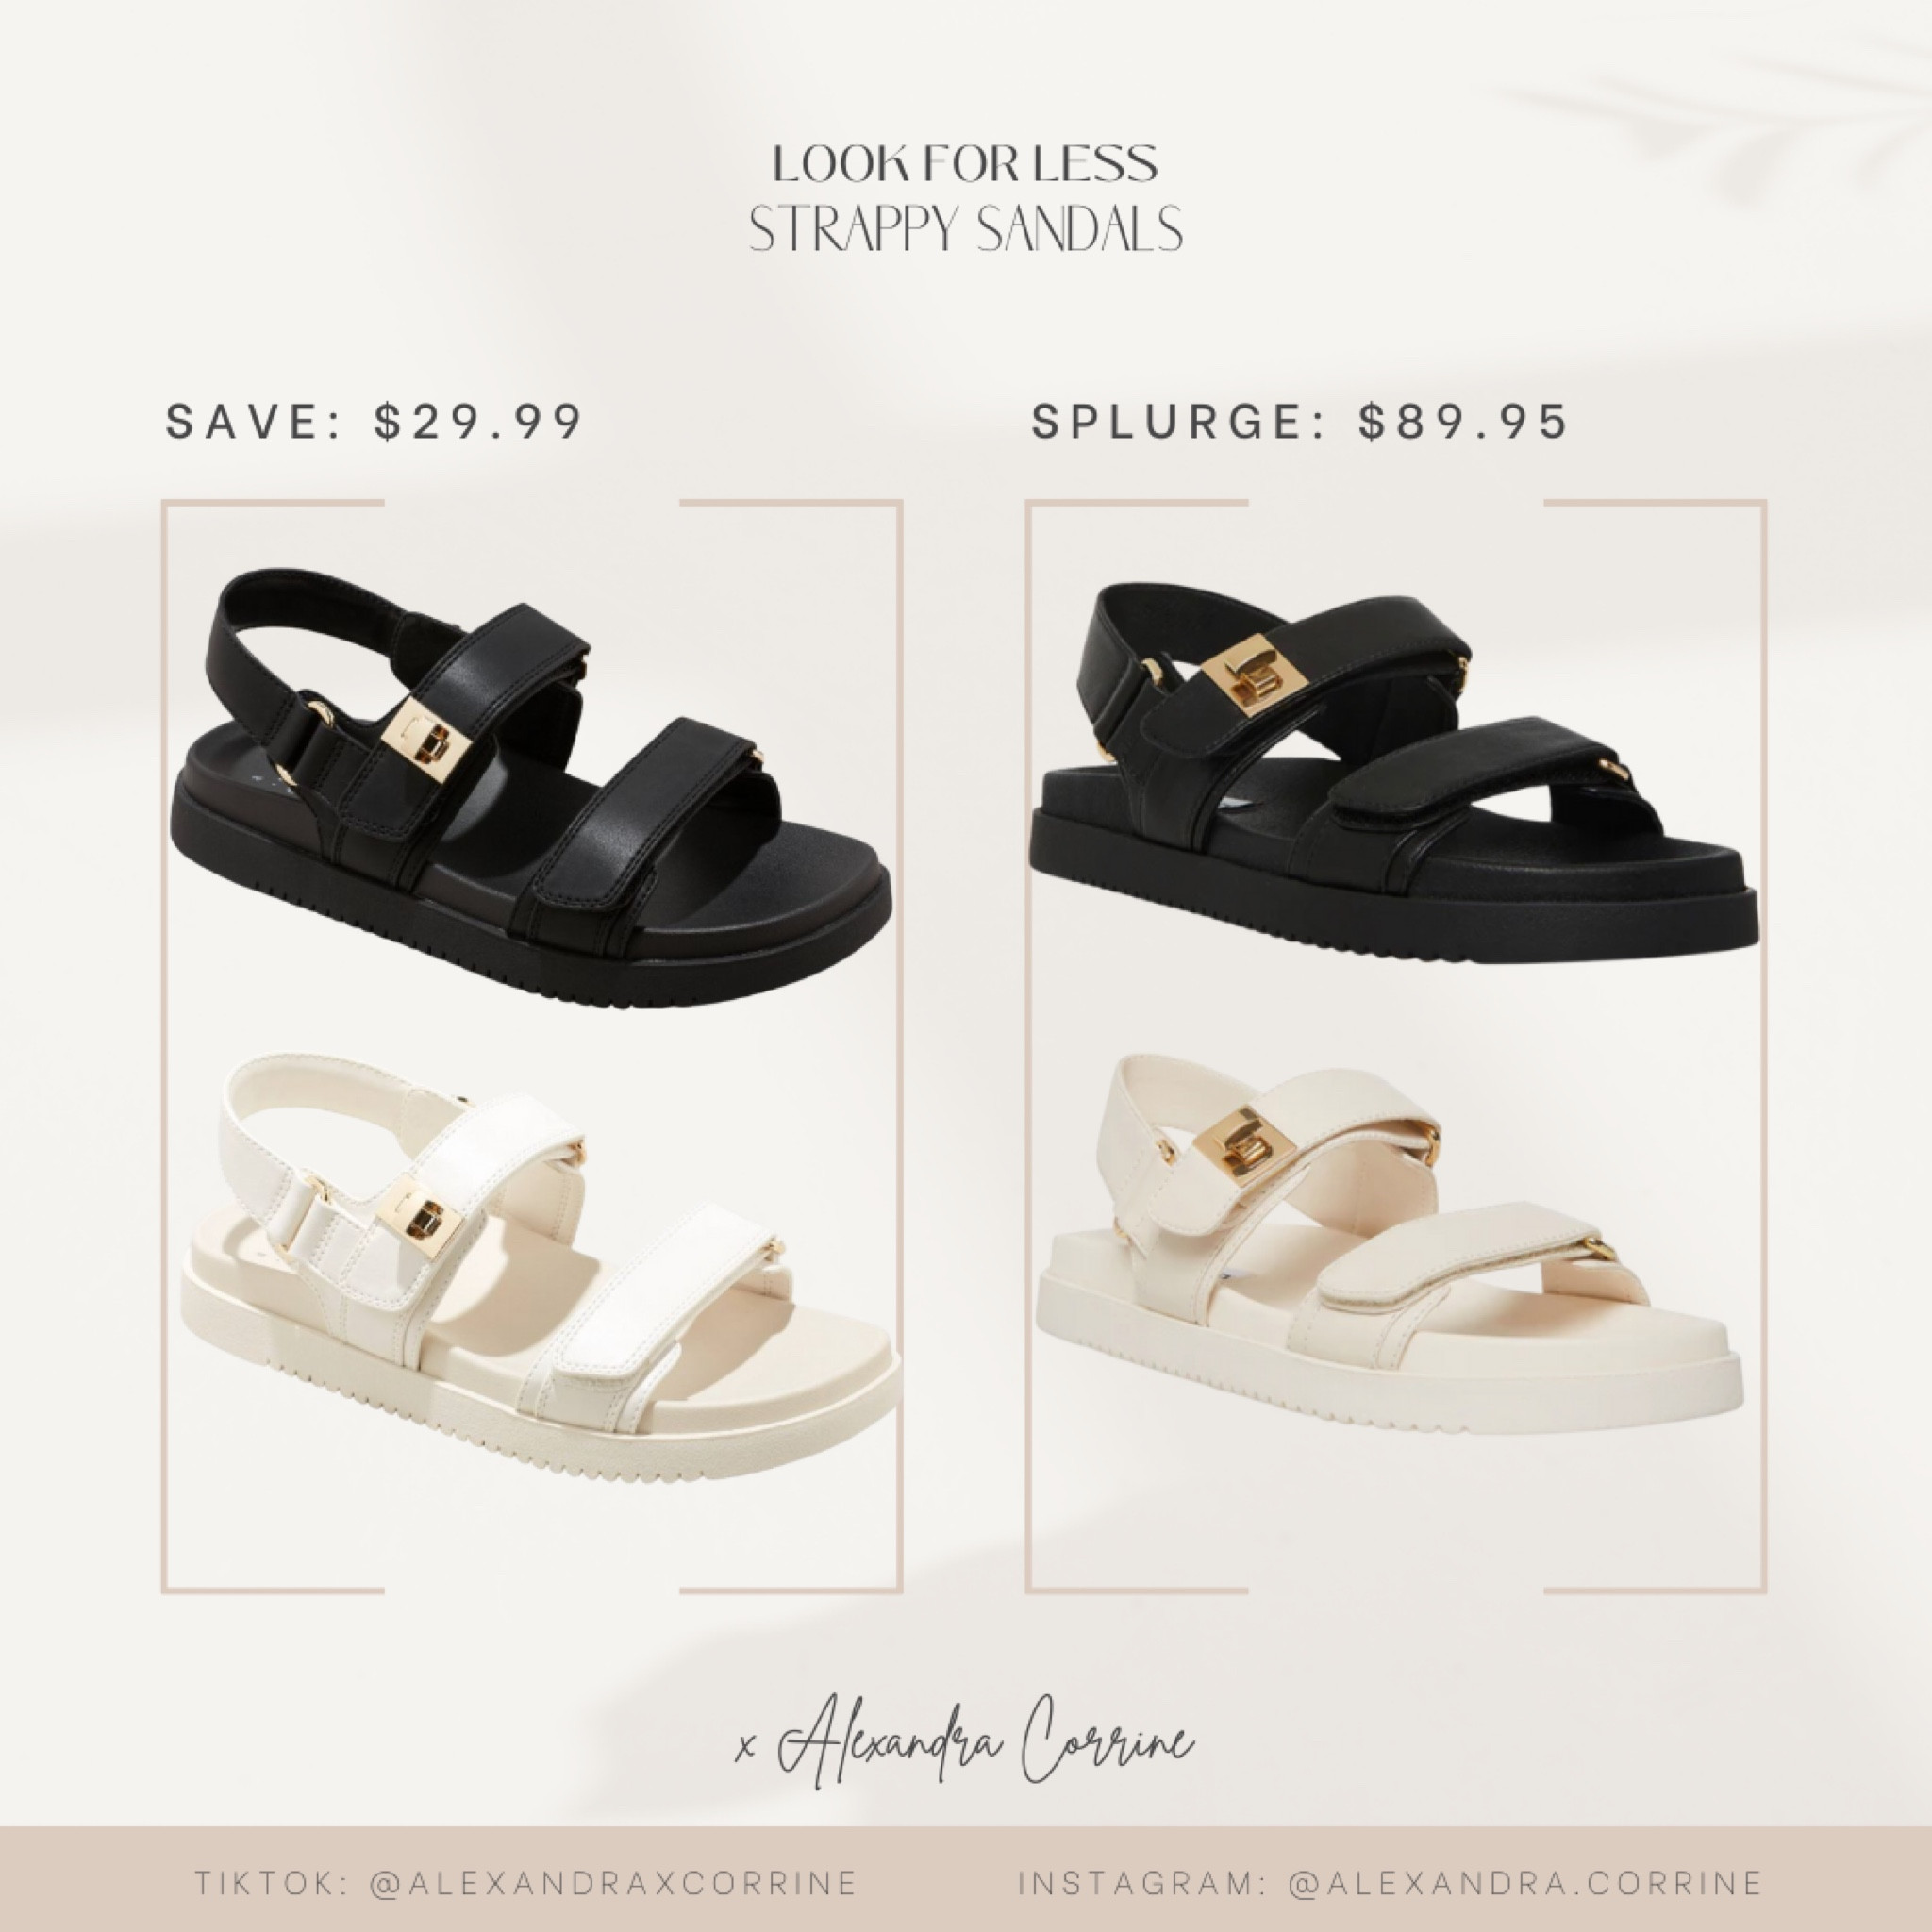 everyone needs a simple pair of slides from Louis Vuitton. #fyp